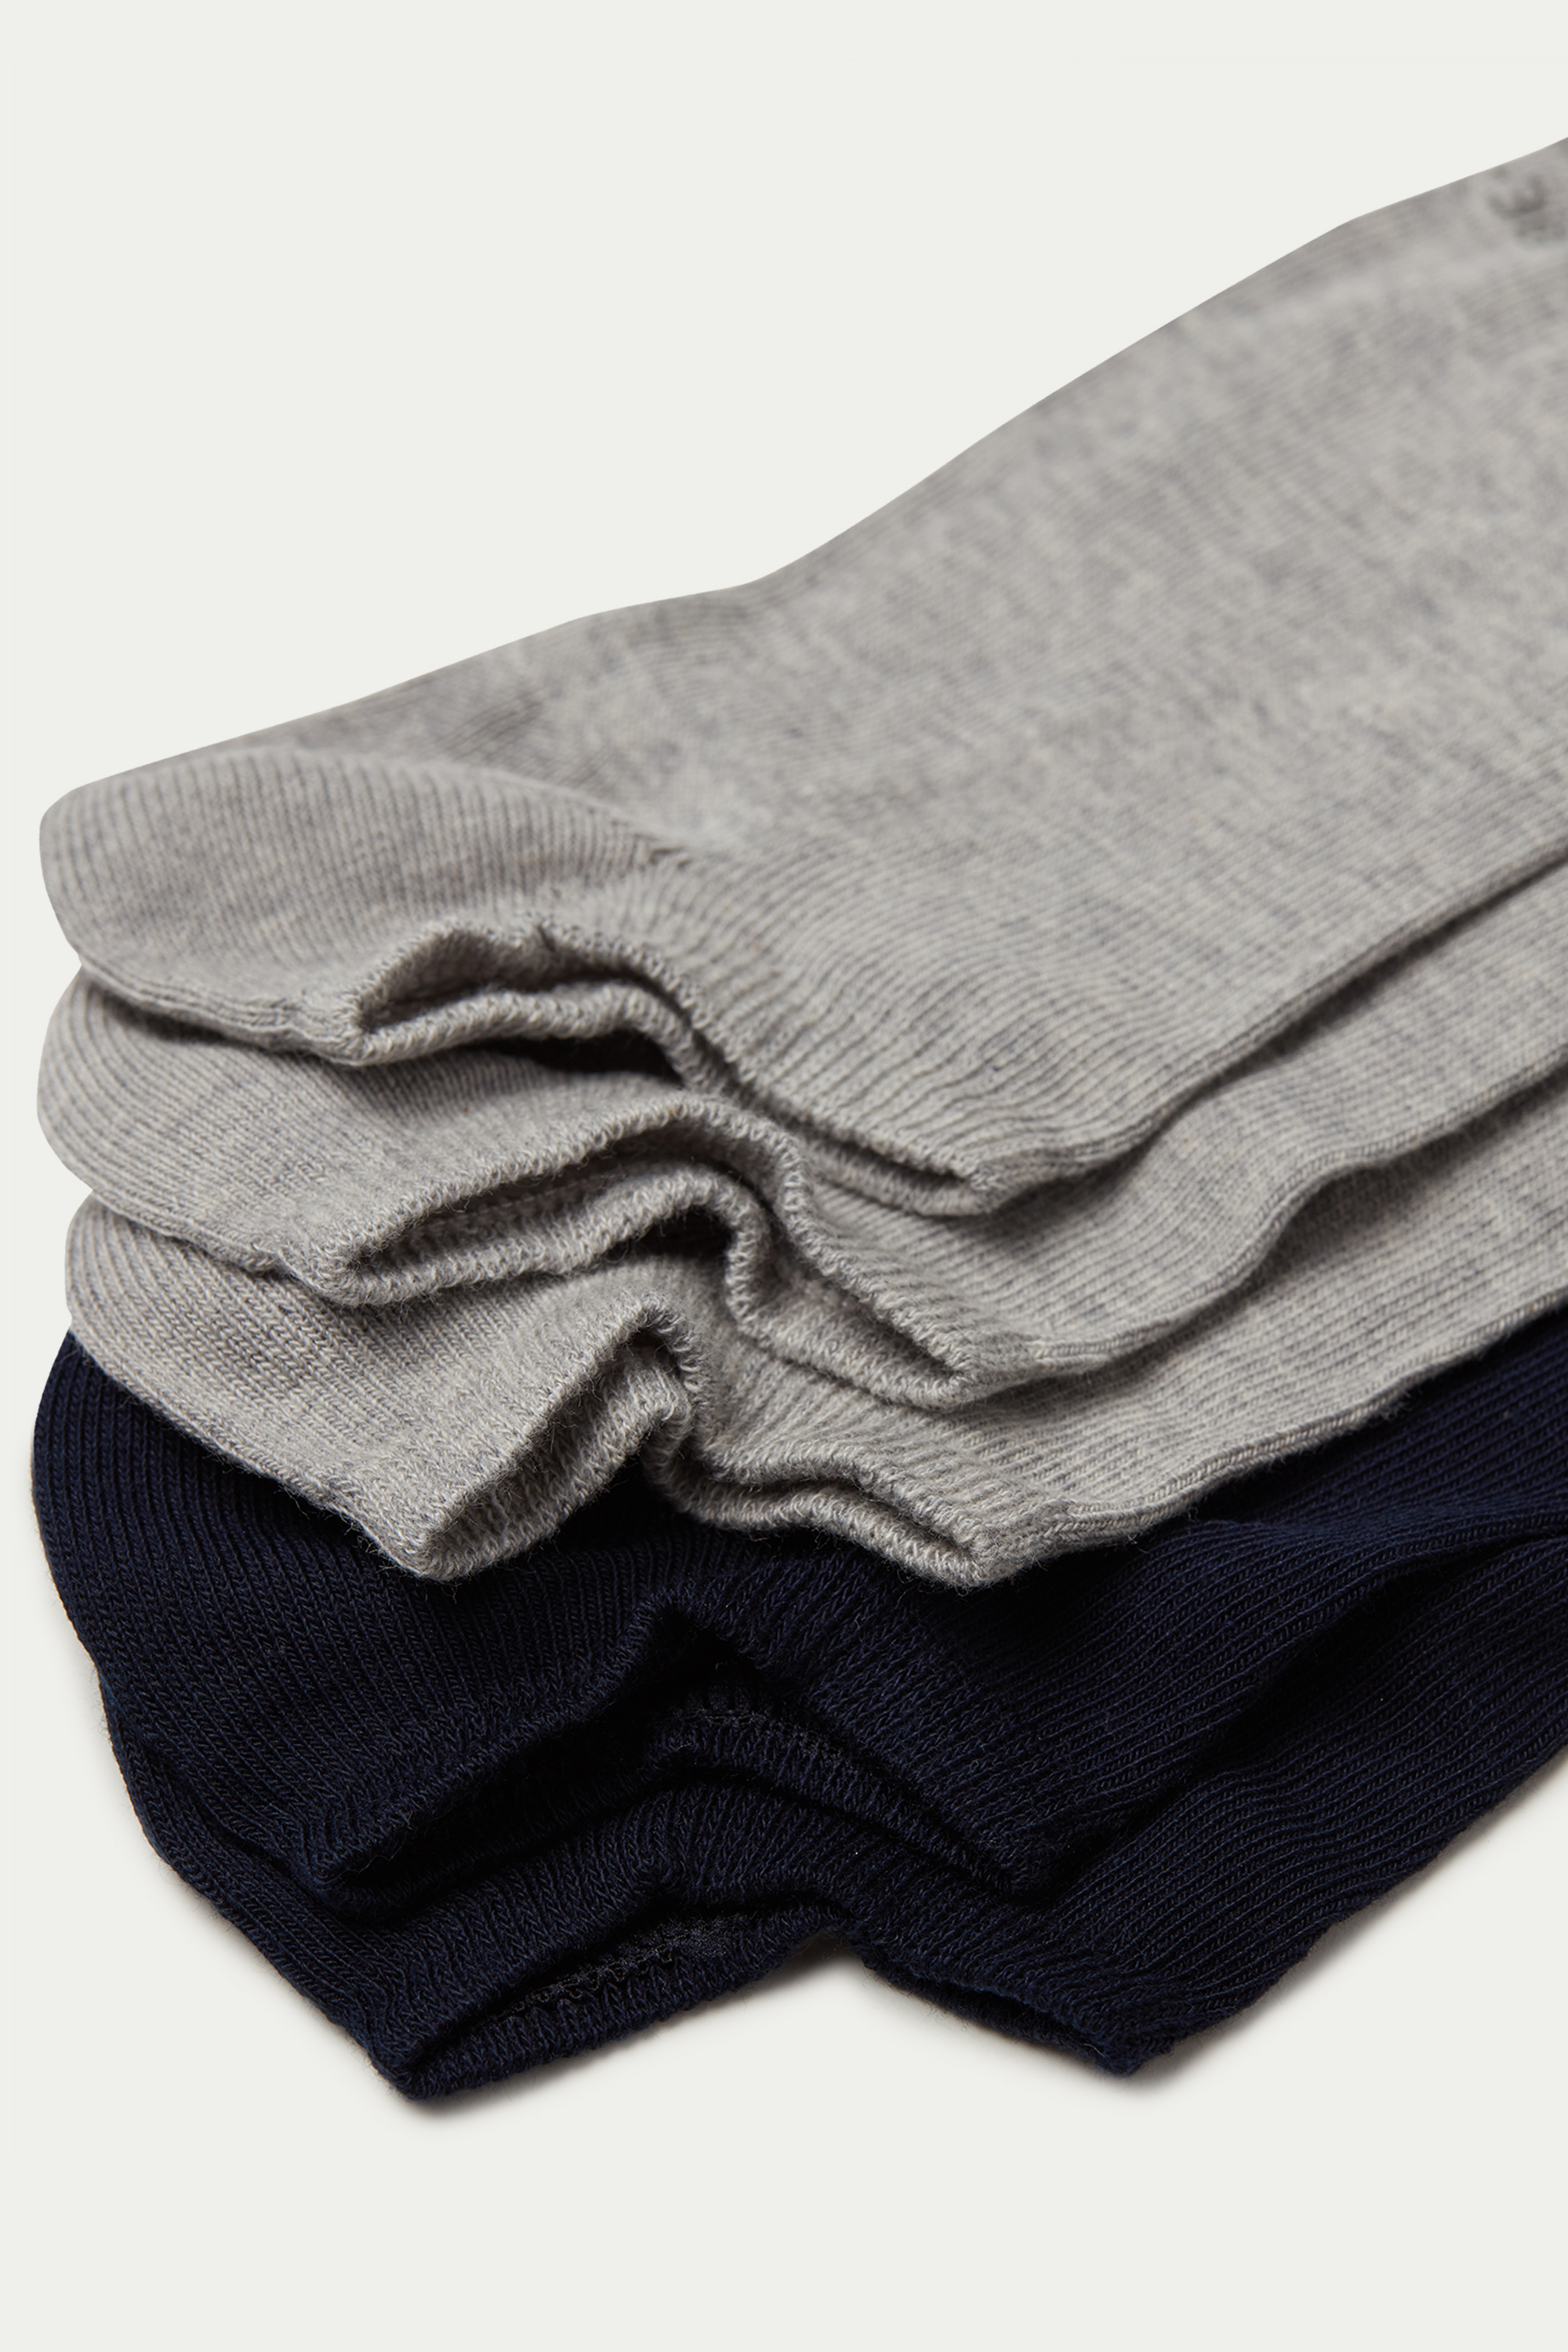 5 Pairs of Solid-Colored Cotton Ankle Socks